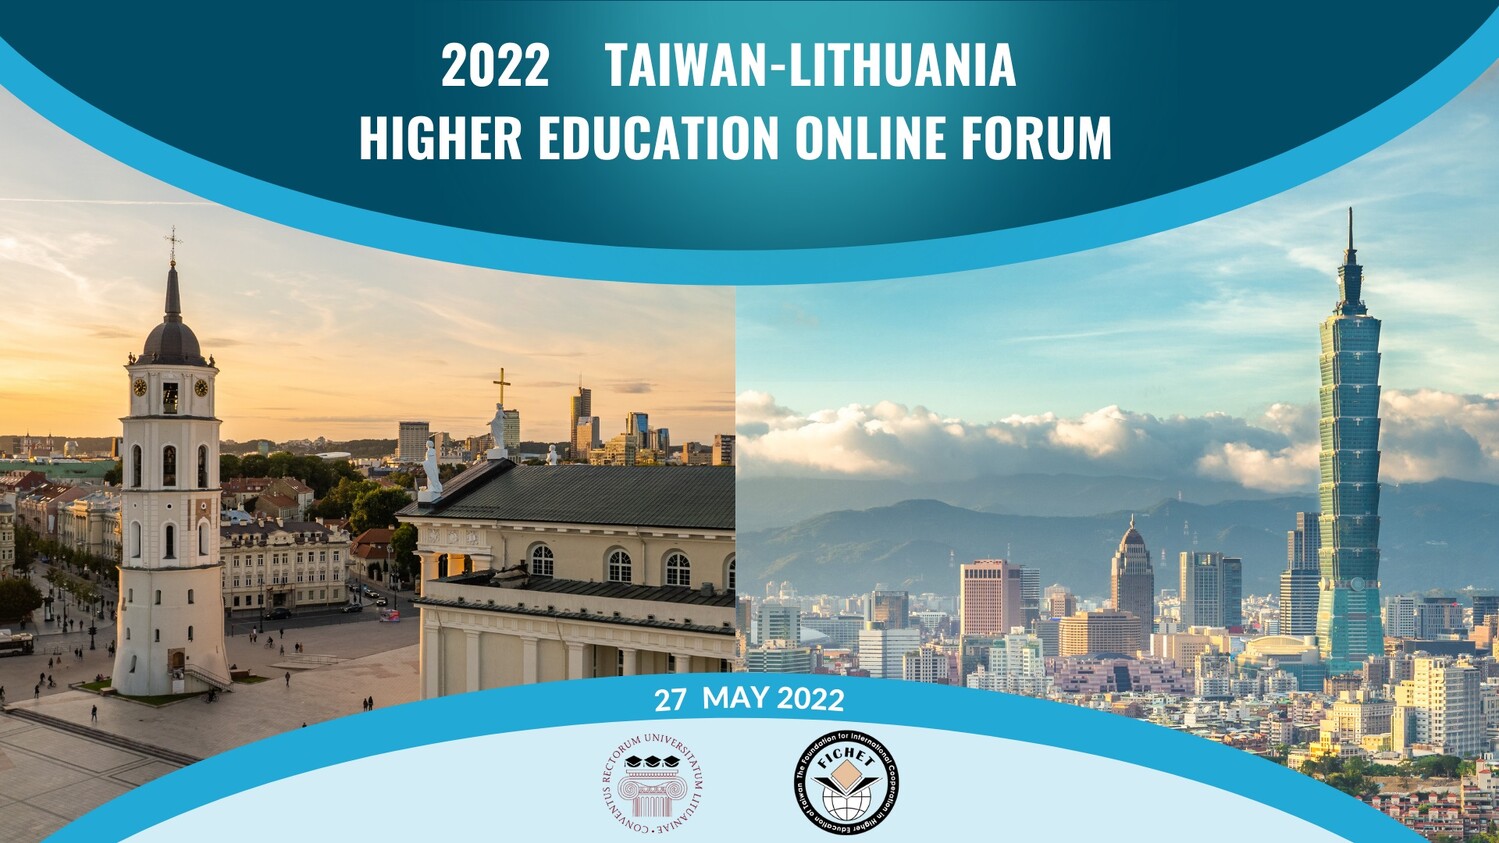 Taiwan-Lithuania Higher Education Online Forum